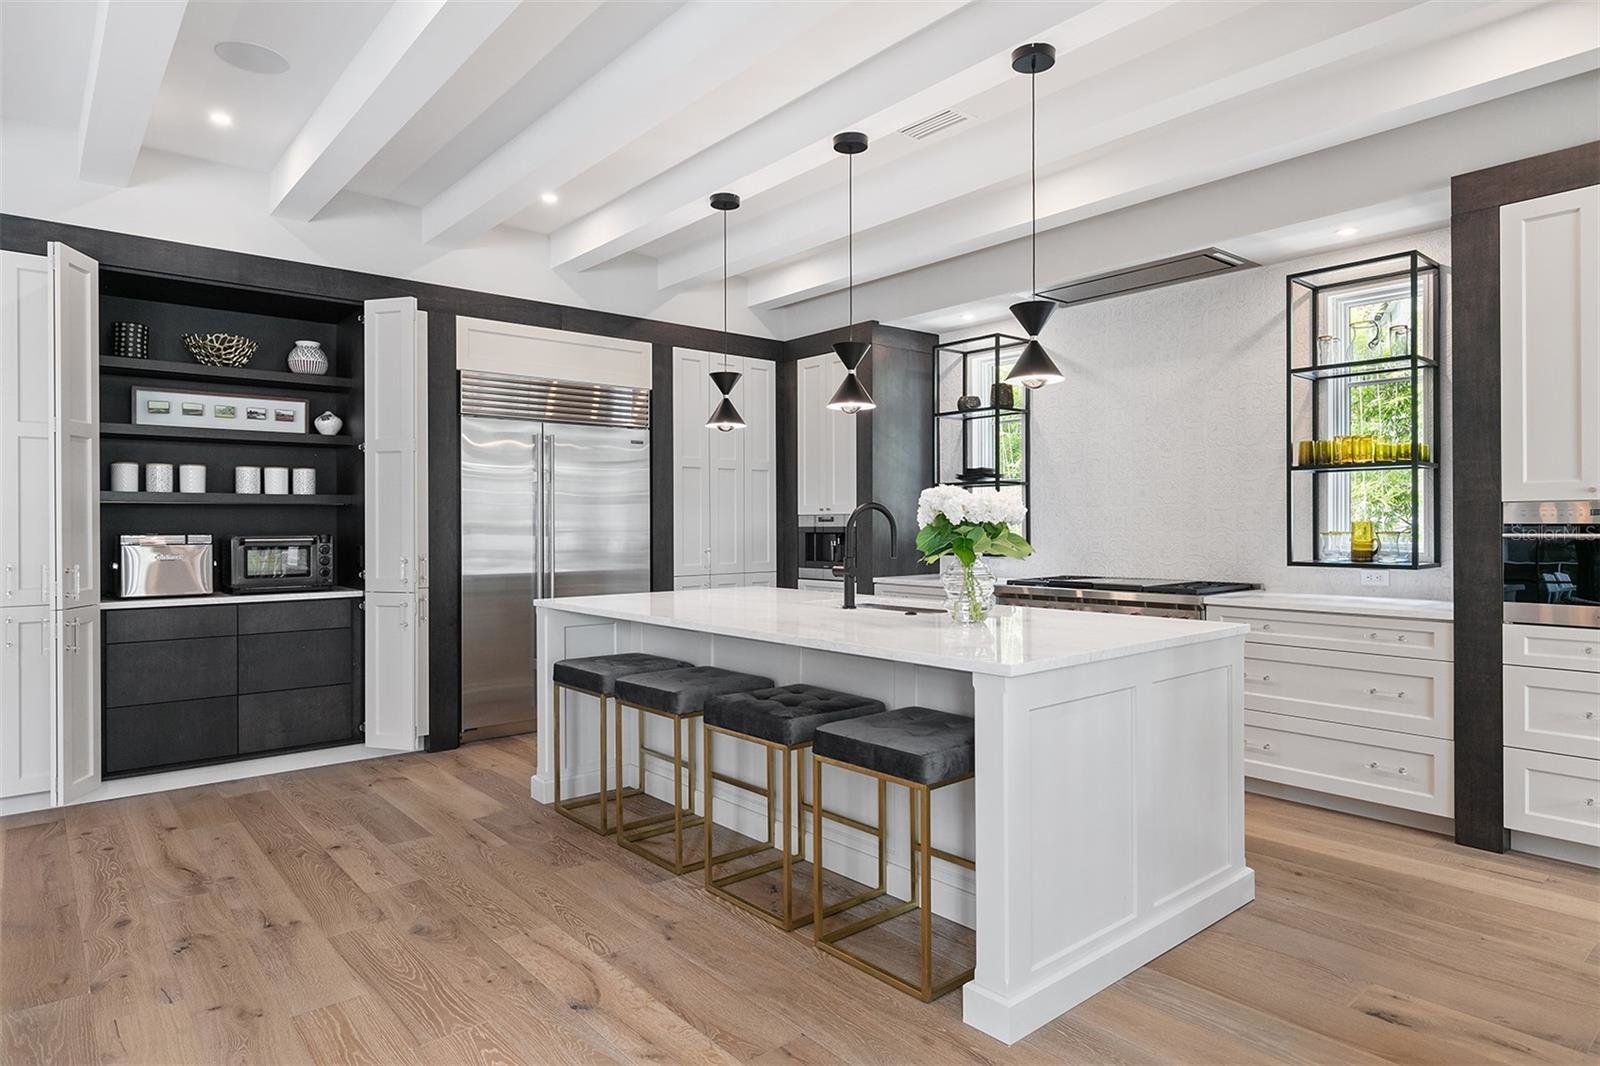 modern kitchen with white and black decor